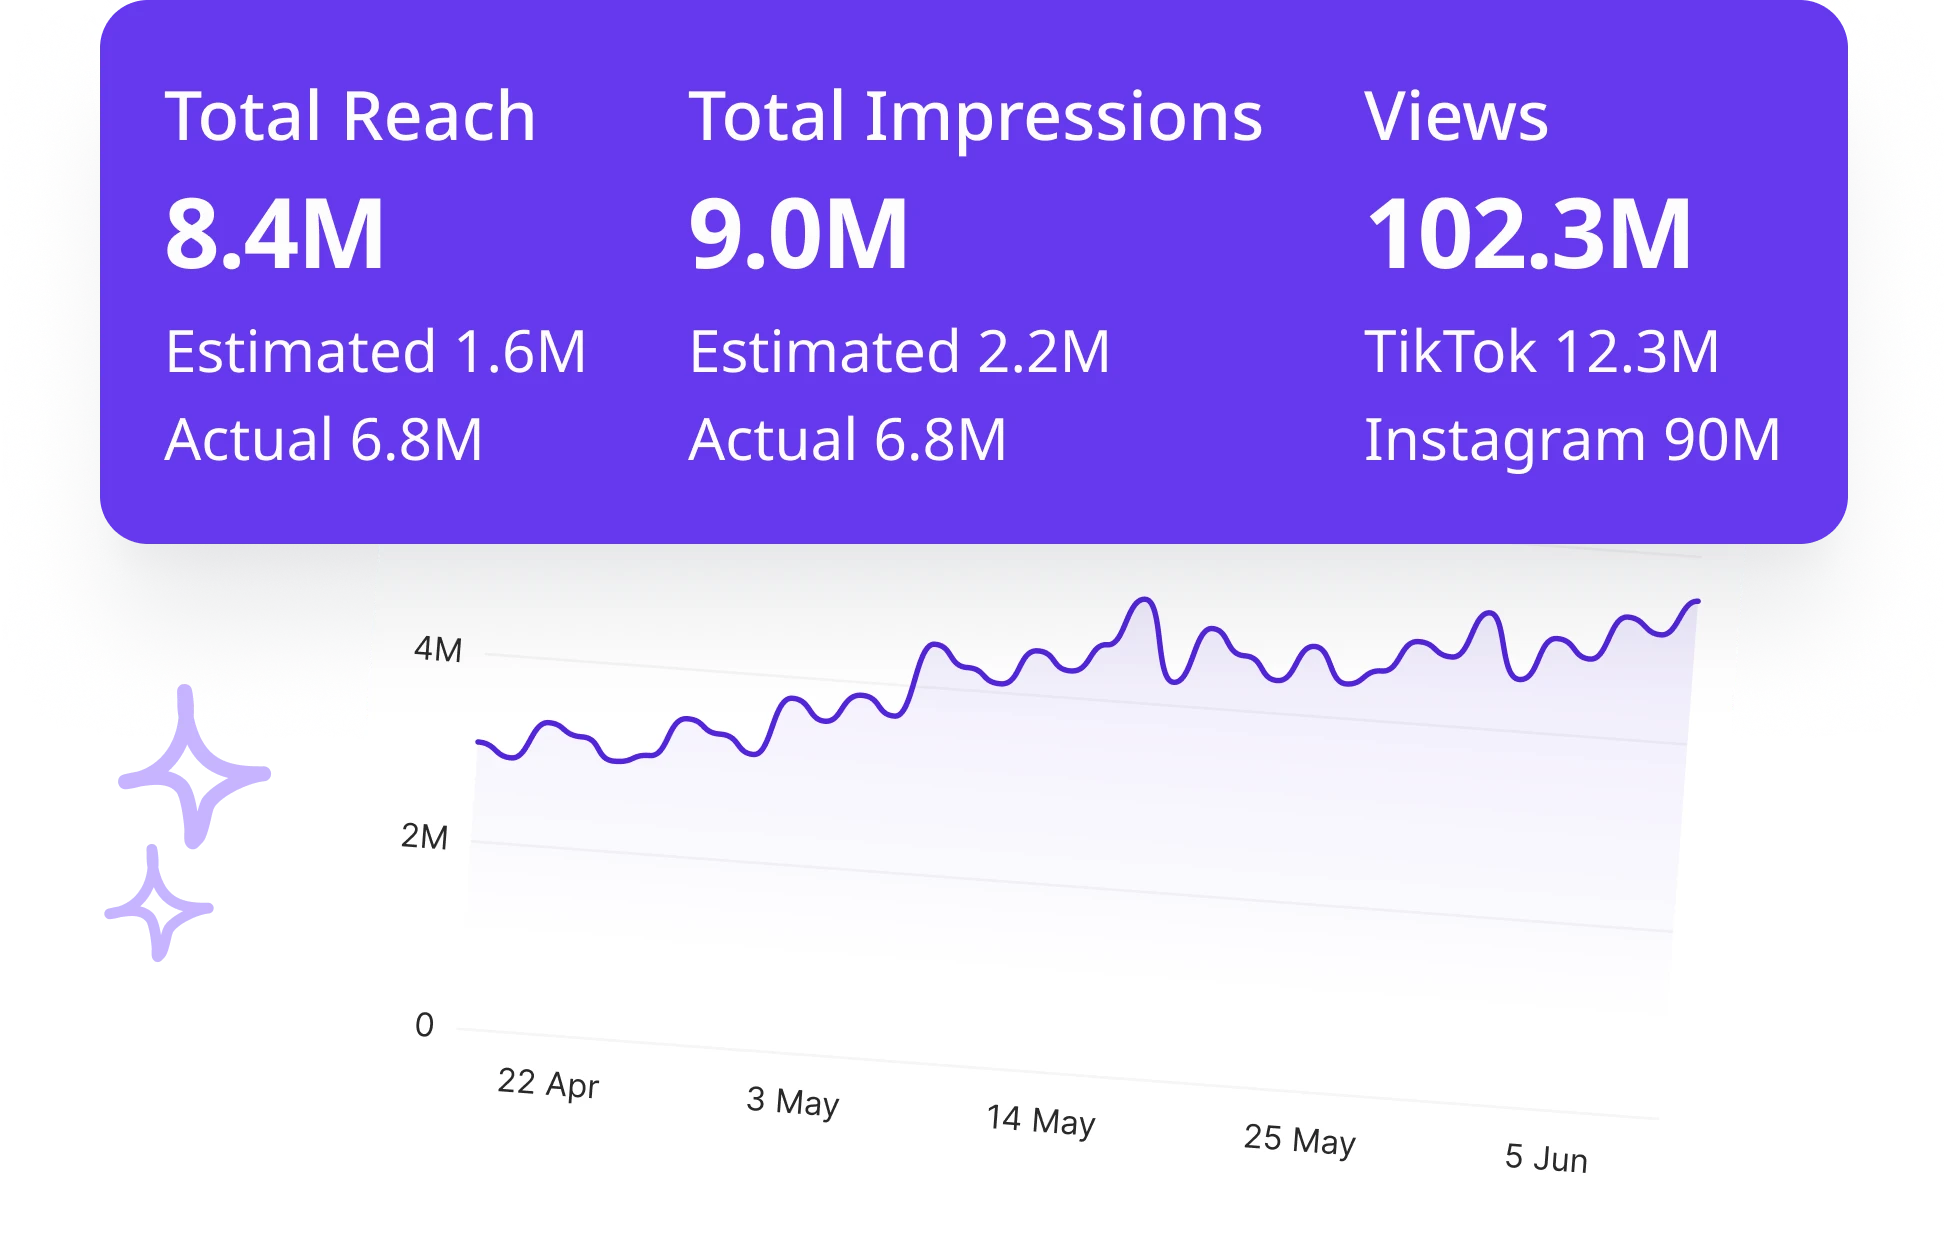 Influencer stats for reach, impressions and views